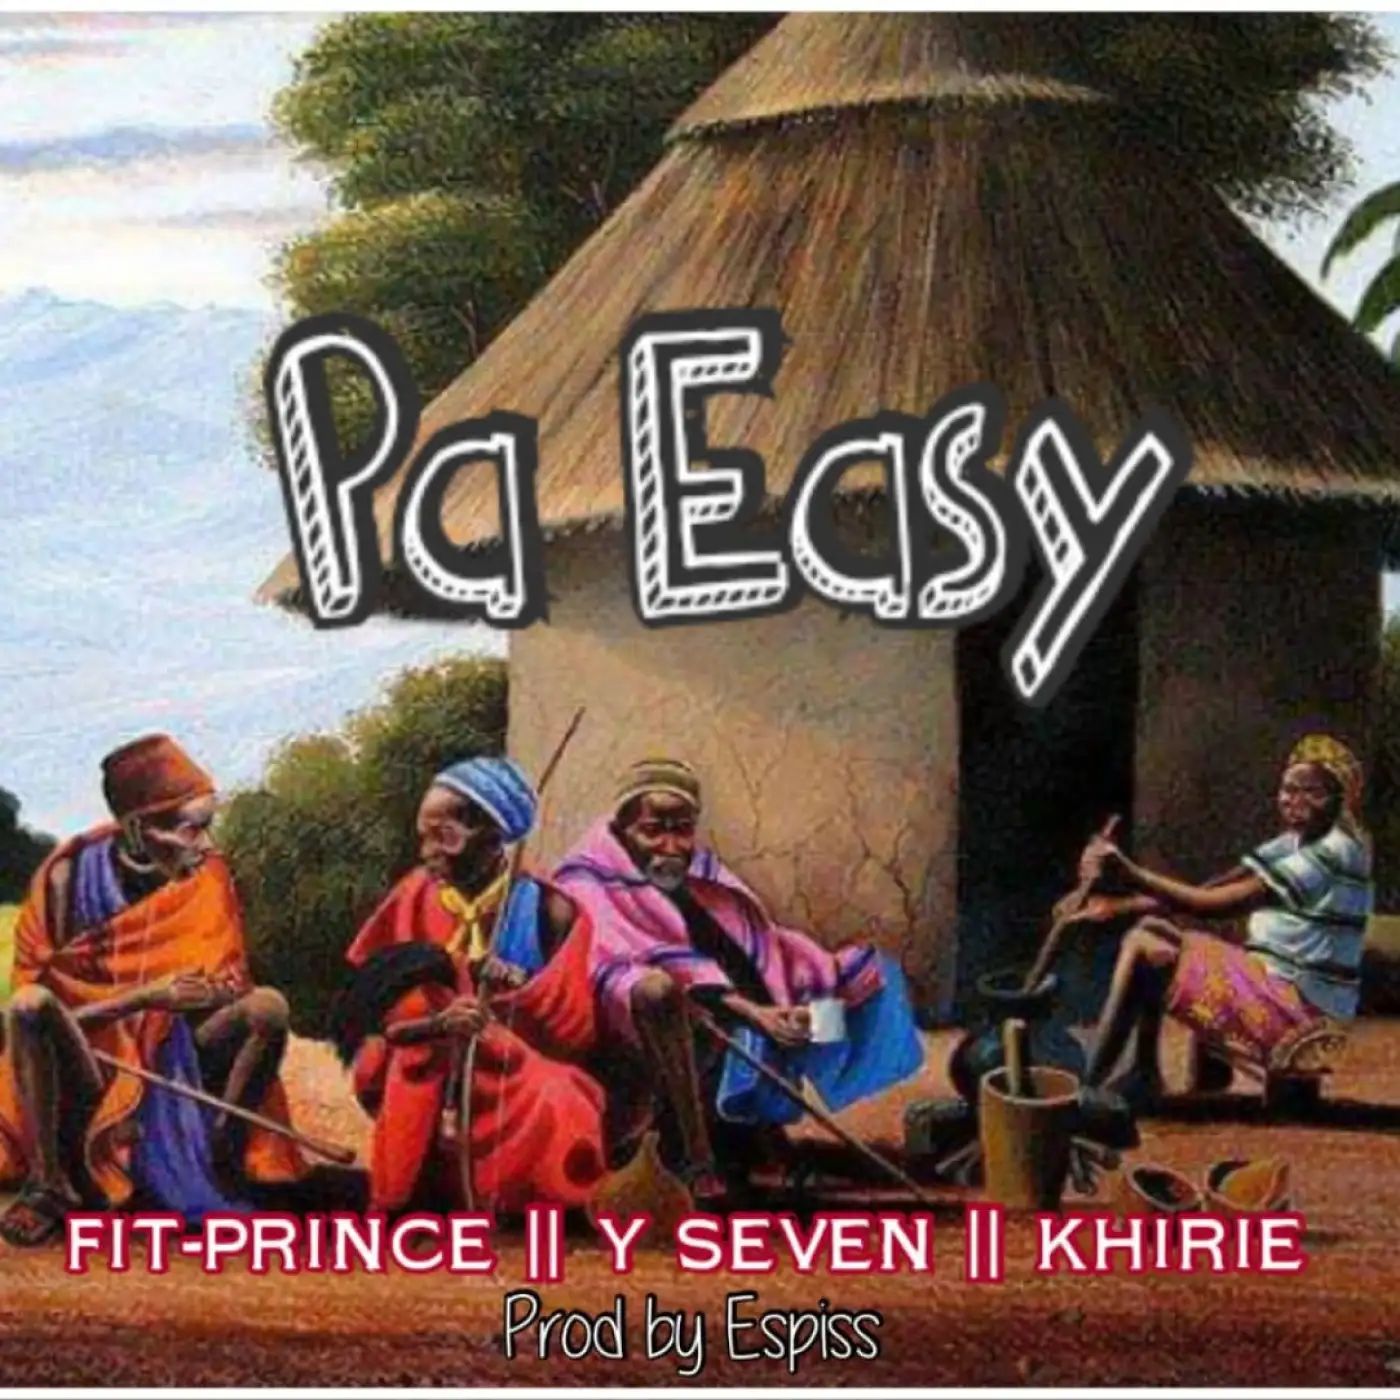 Fit Prince-Fit Prince - Ndili Pa Easy Ft Y Seven & Khirie (Prod. Espiss)-song artwork cover